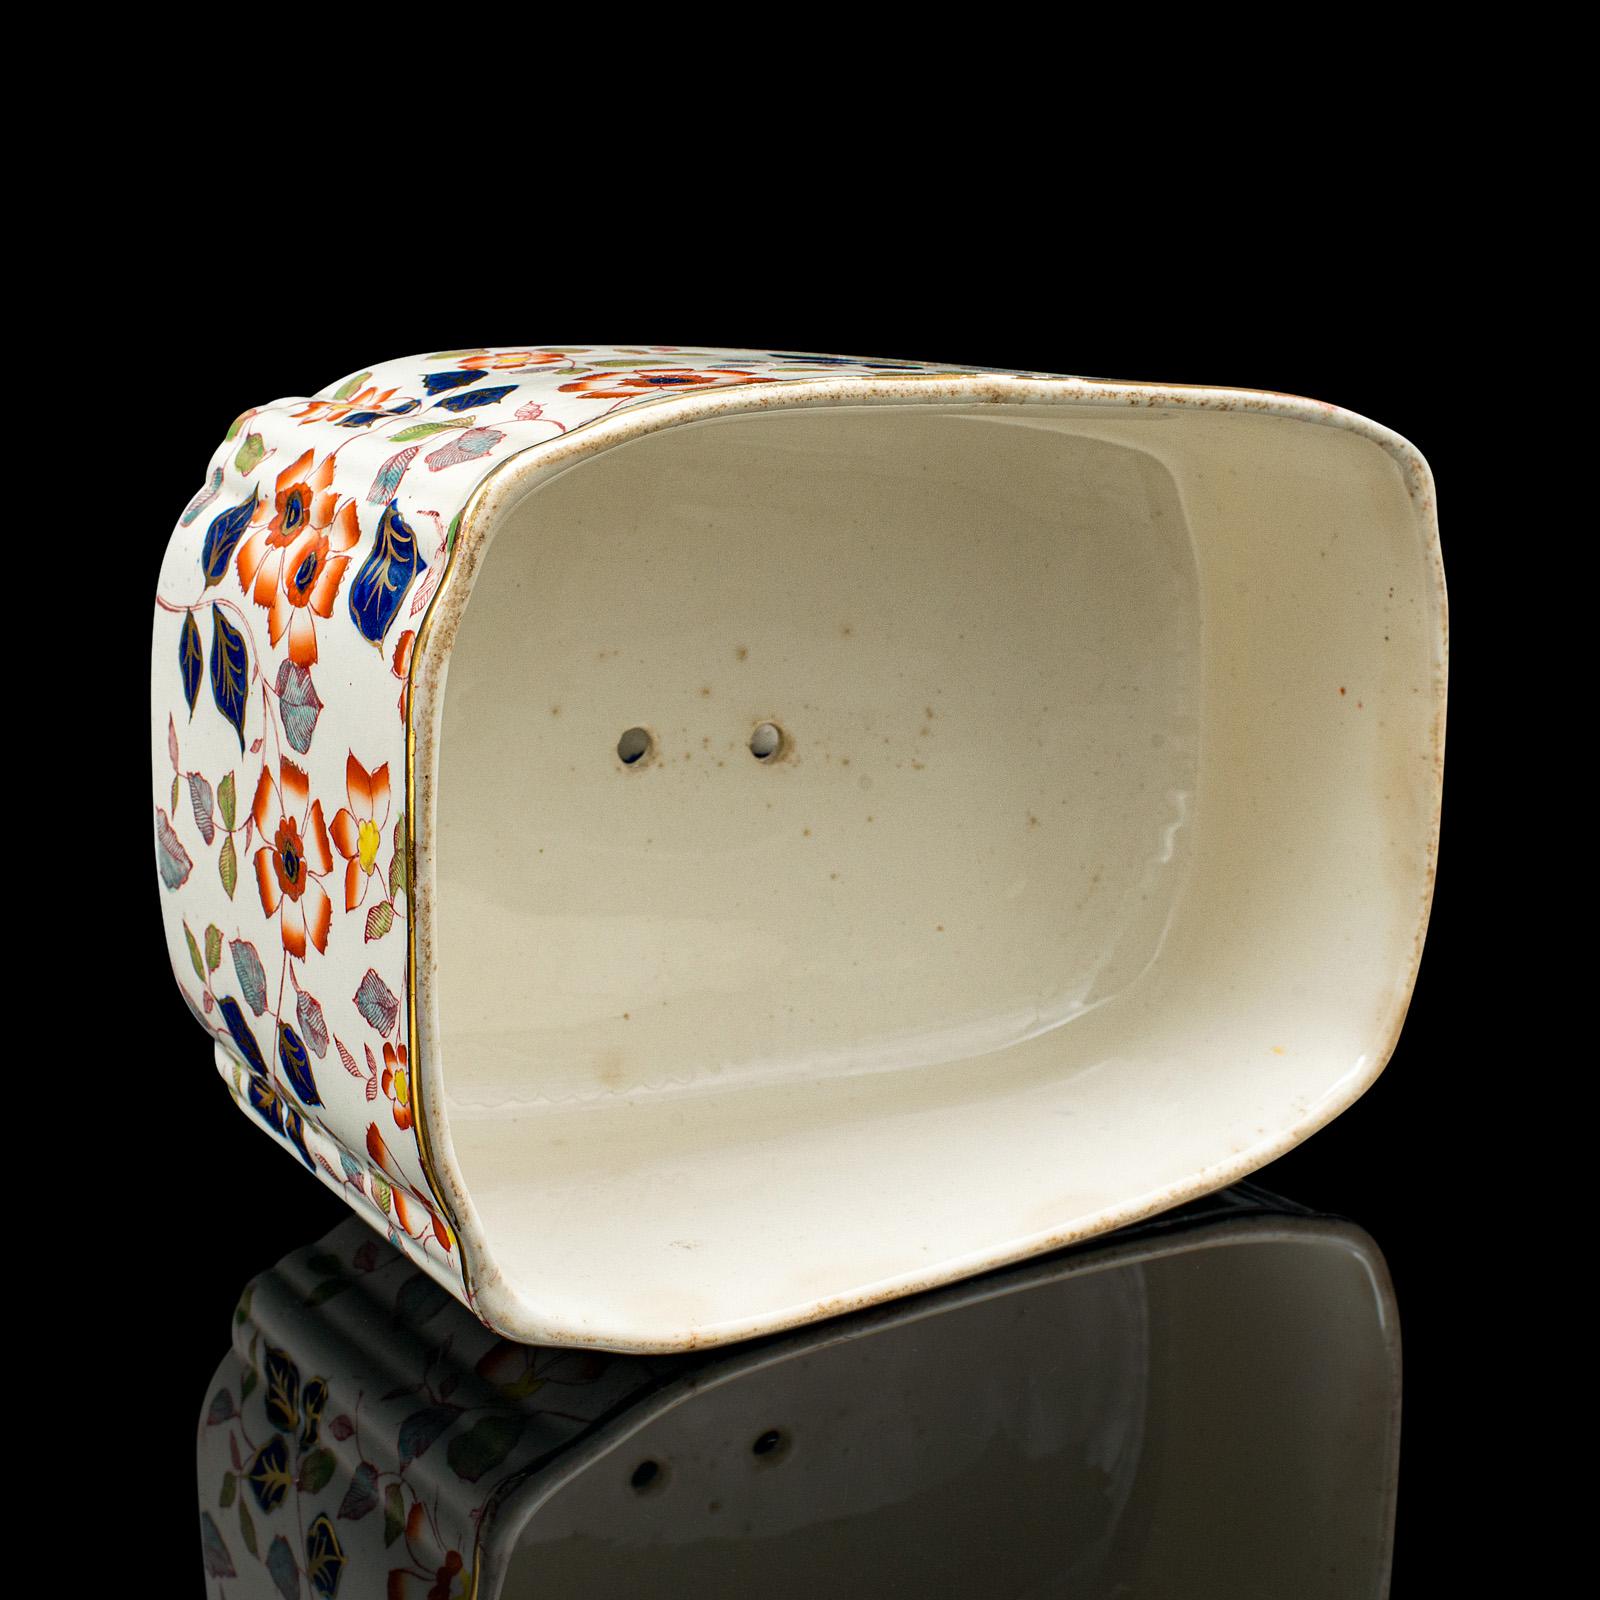 Antique Decorative Cheese Keeper, English, Ceramic, Butter Dish, Victorian, 1900 For Sale 2